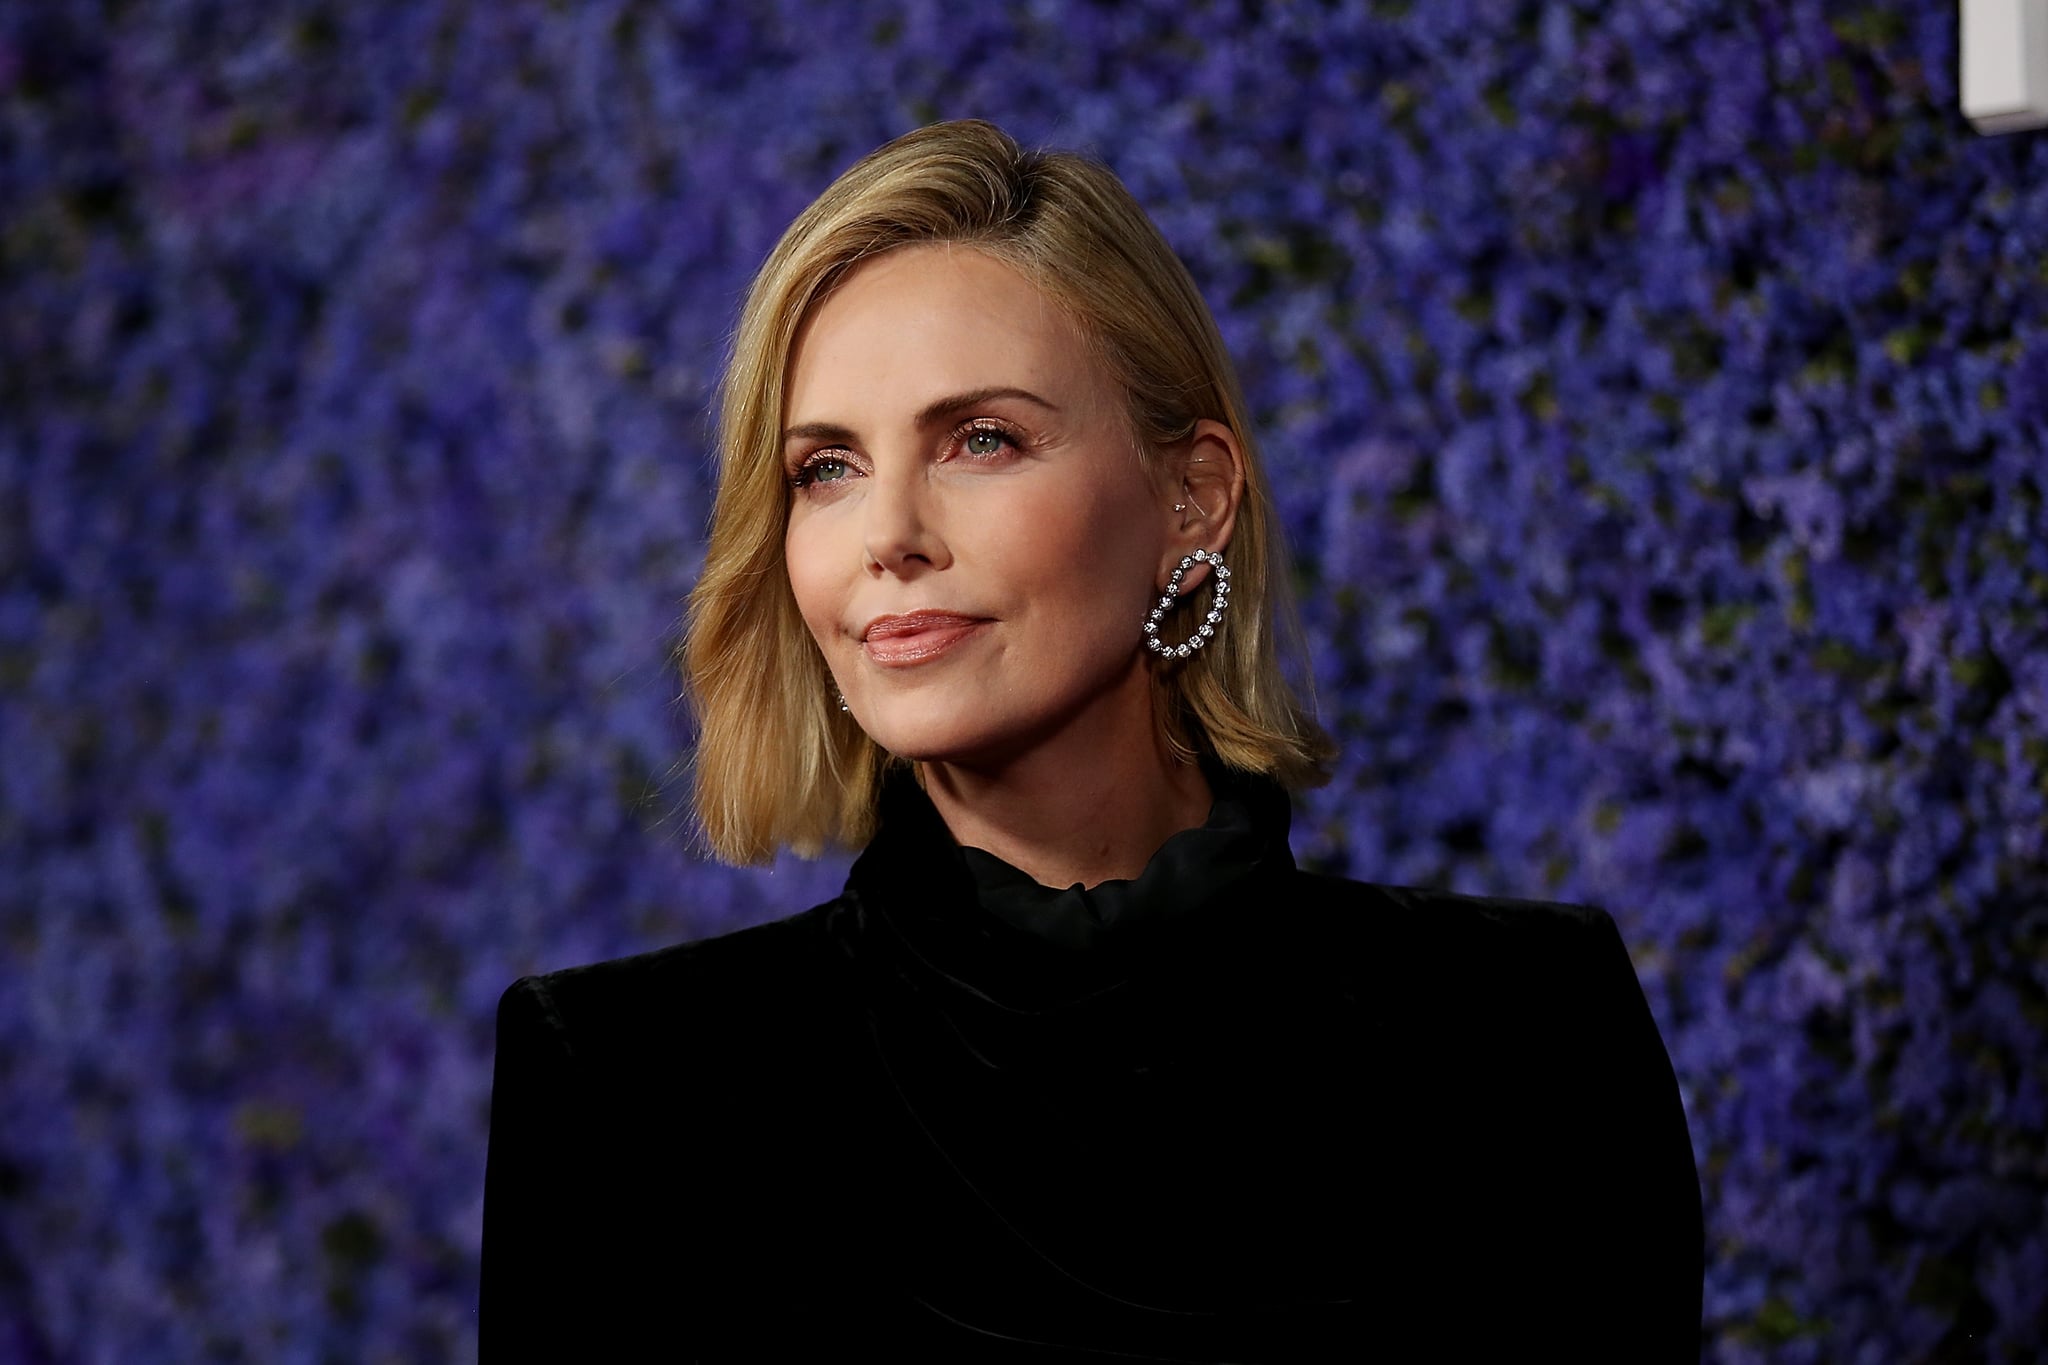 PACIFIC PALISADES, CA - SEPTEMBER 20:  Charlize Theron attends Caruso's Palisades Village opening gala at Palisades Village on September 20, 2018 in Pacific Palisades, California.  (Photo by Phillip Faraone/Getty Images)